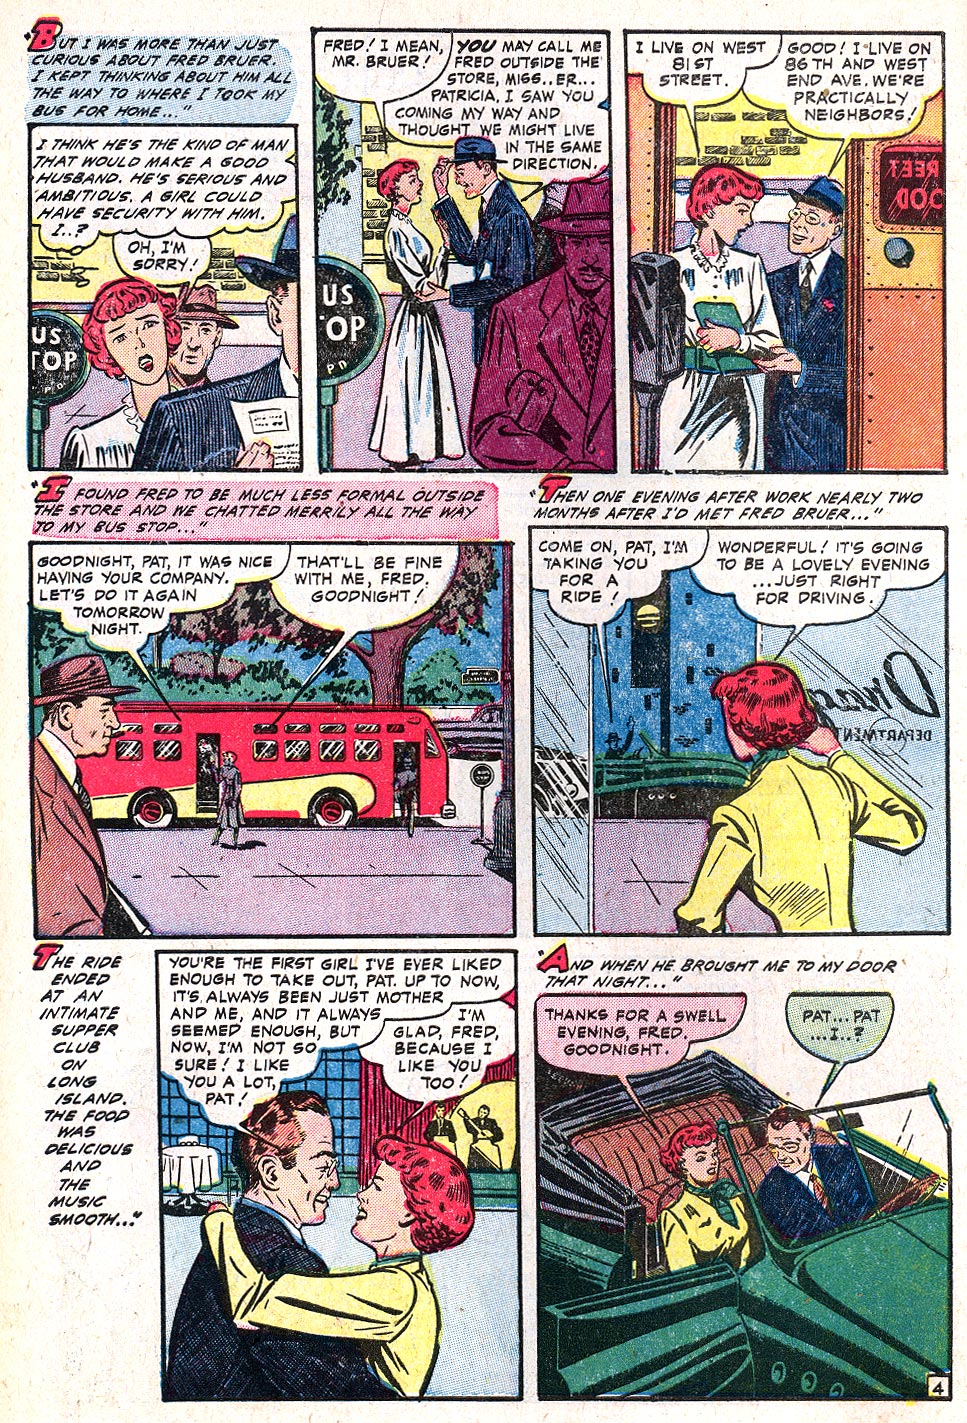 Romantic Love (1958) issue 3 - Page 6